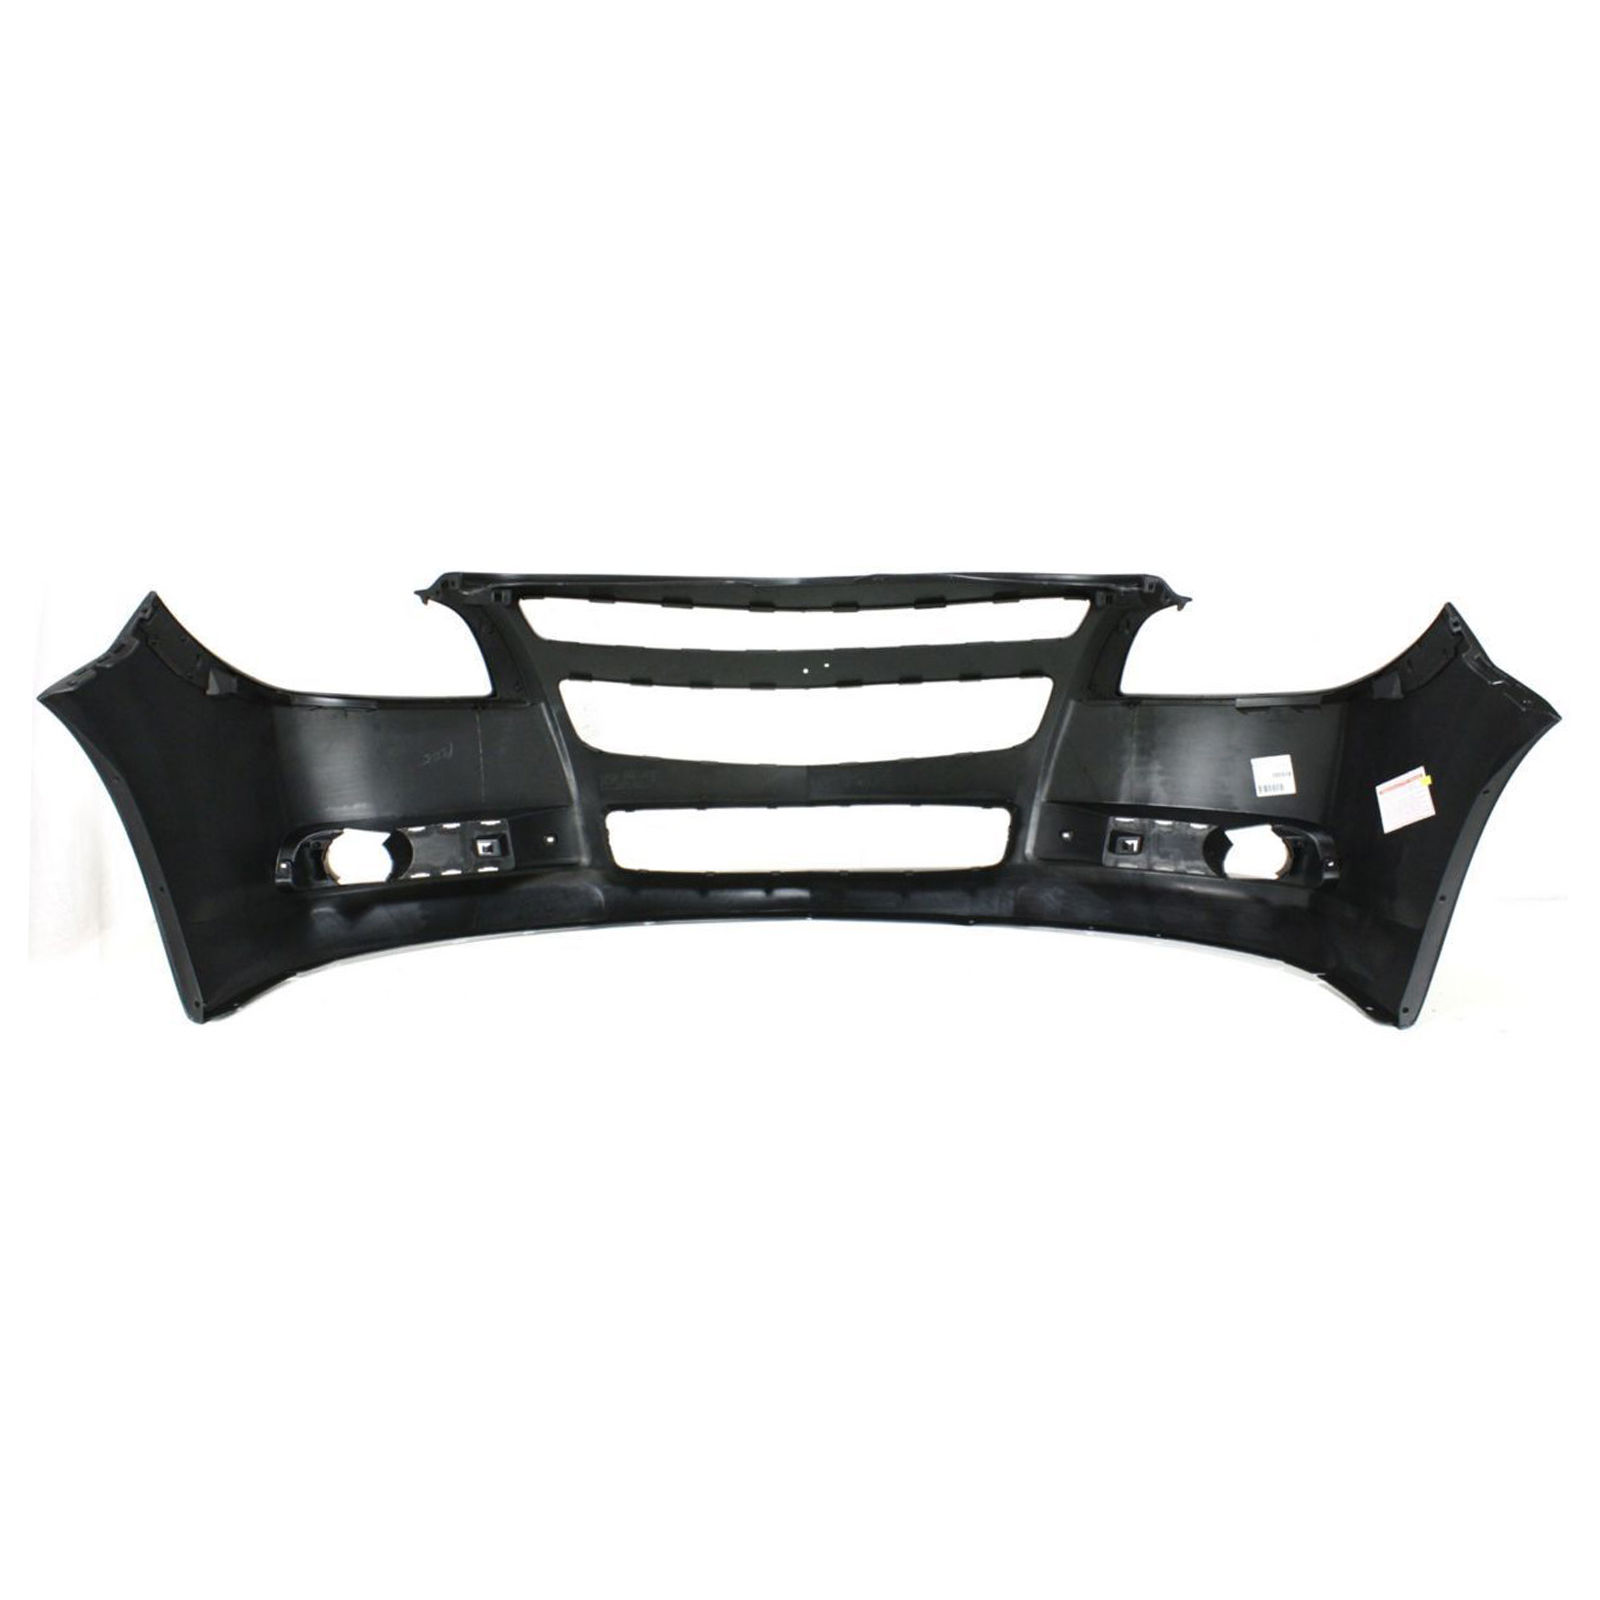 2008-2012 CHEVY MALIBU Front Bumper Cover w/o Emblem Painted to Match